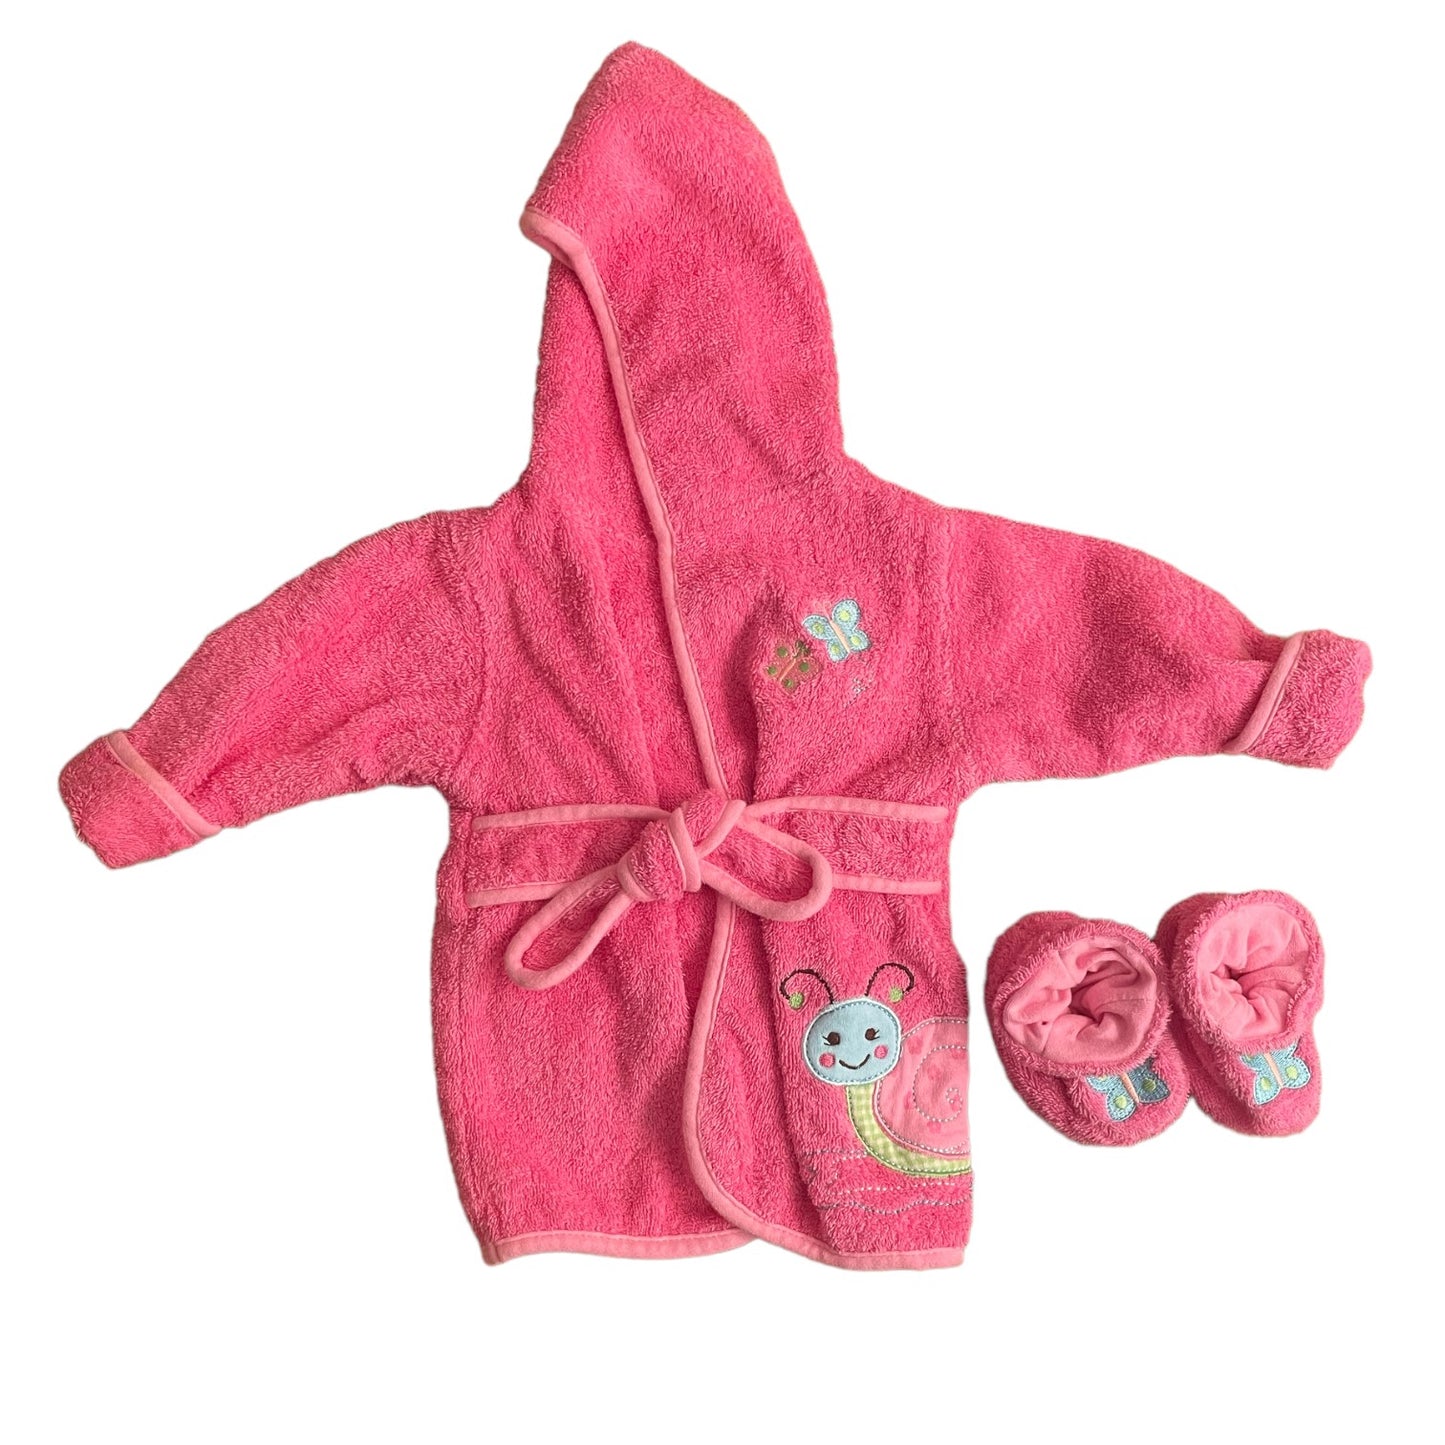 Babies R' Us Girls Baby Bath Robe and Slippers 0-9 months